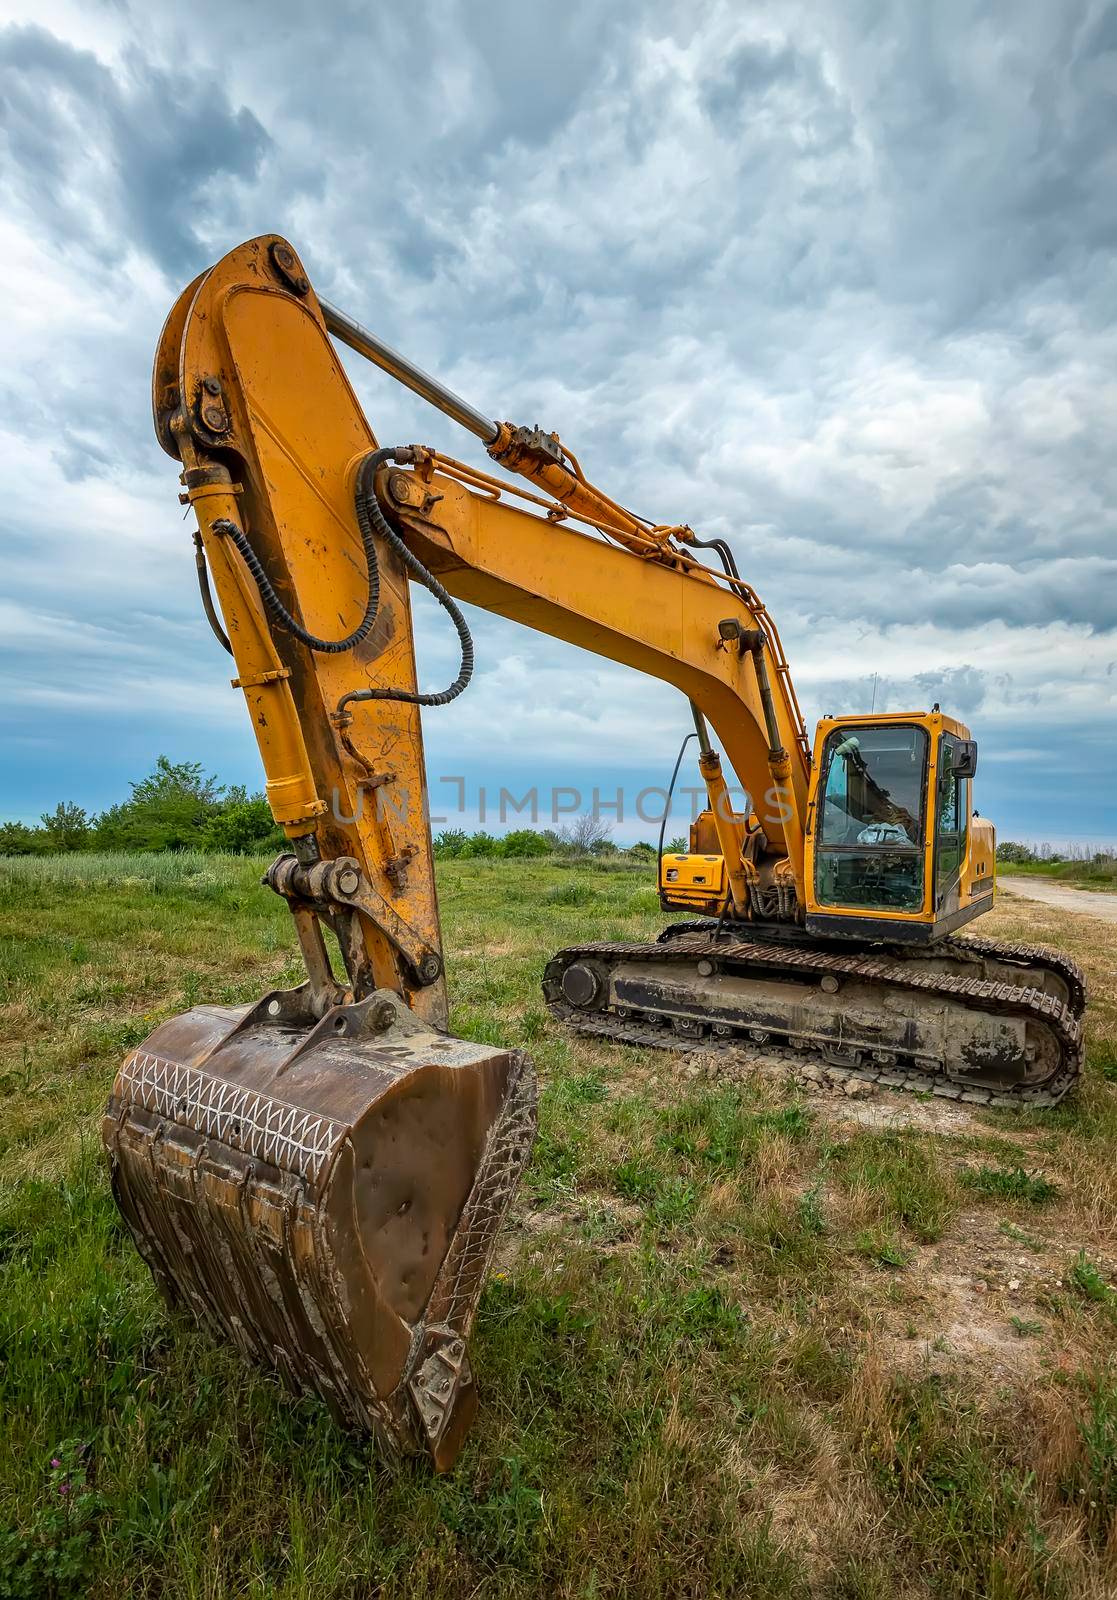 A parked yellow excavator on a meadow at sunset